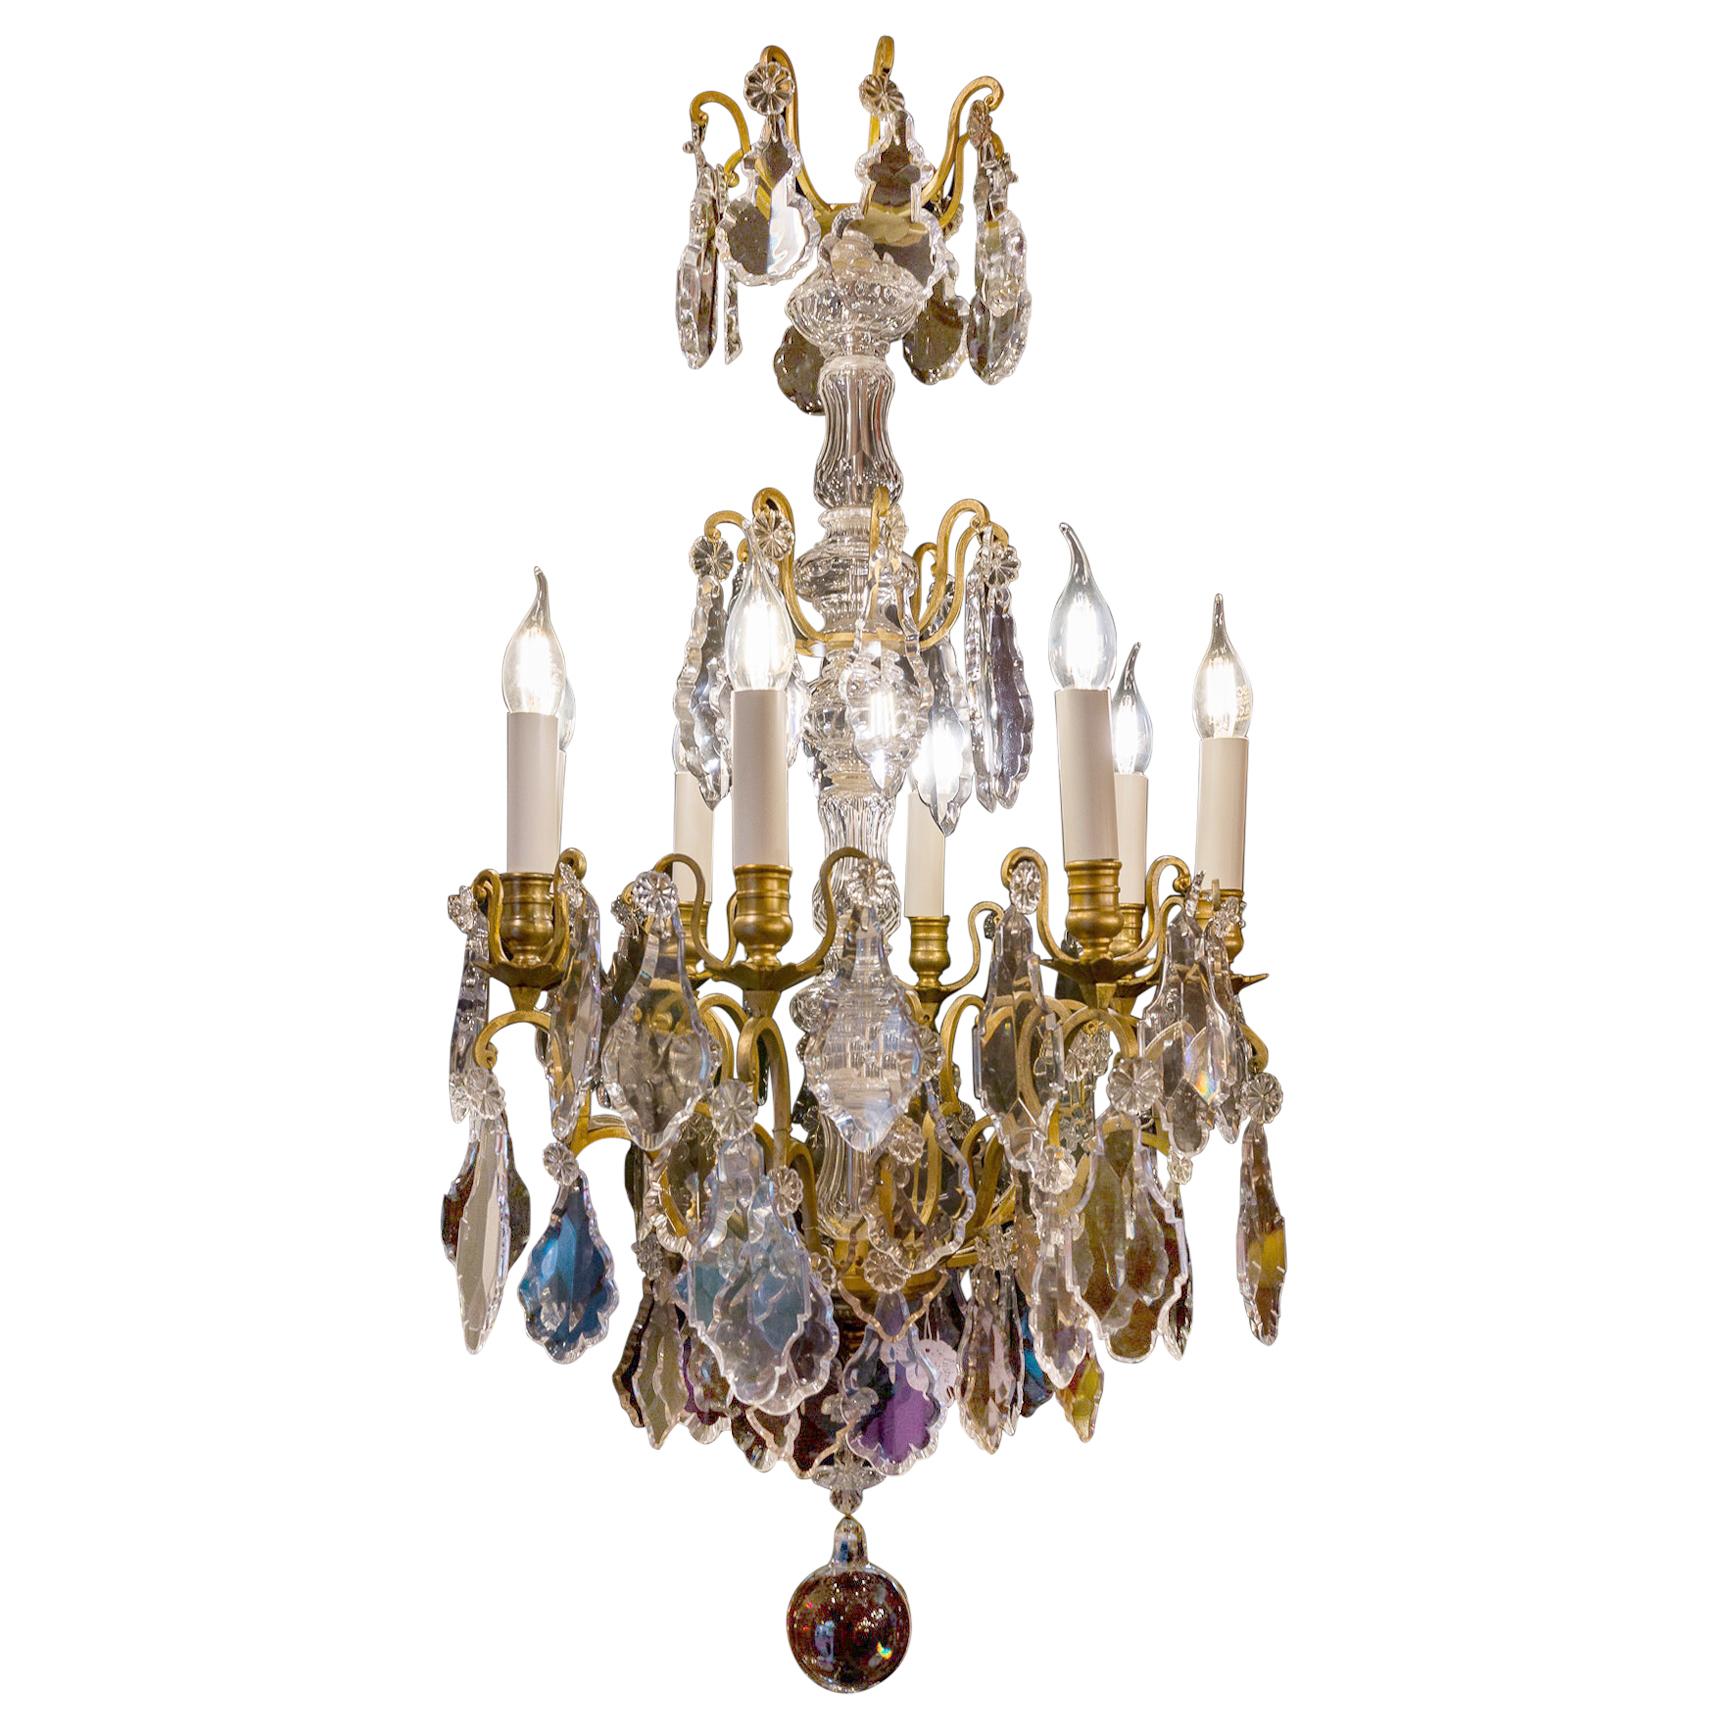 French Louis XVI Style Gilt-Bronze and Crystal Chandelier, circa 1890-1910